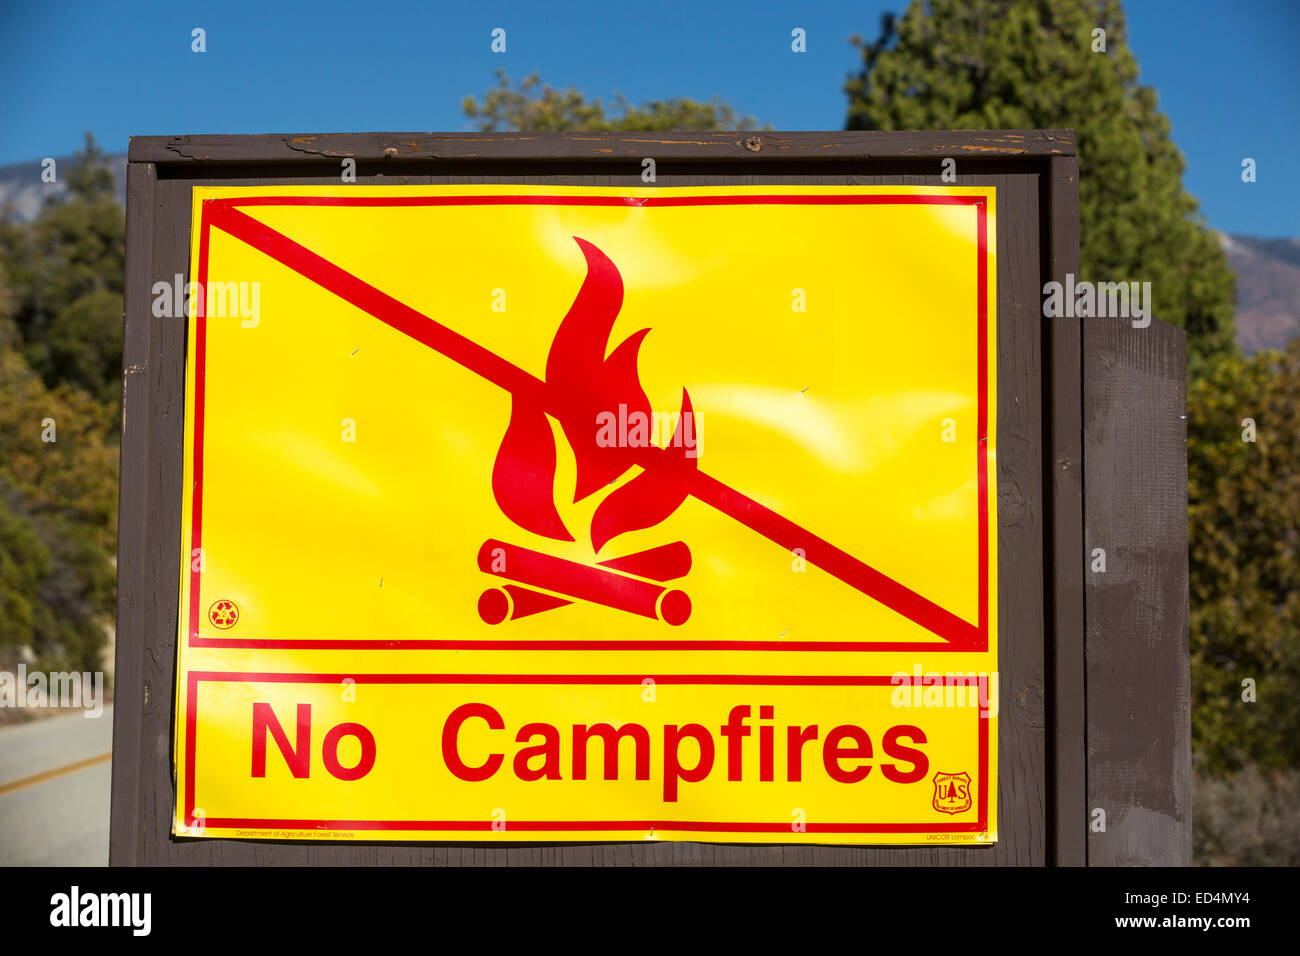 A fire danger sign in the Tule river area of the Sequoia National Forest, east of Porterville, California, USA. California is in the grip of a four year long exceptional drought, that has made wild fires much more frequent, as well as wiping $2.2 Billion annually off the agricultural sector. Stock Photo